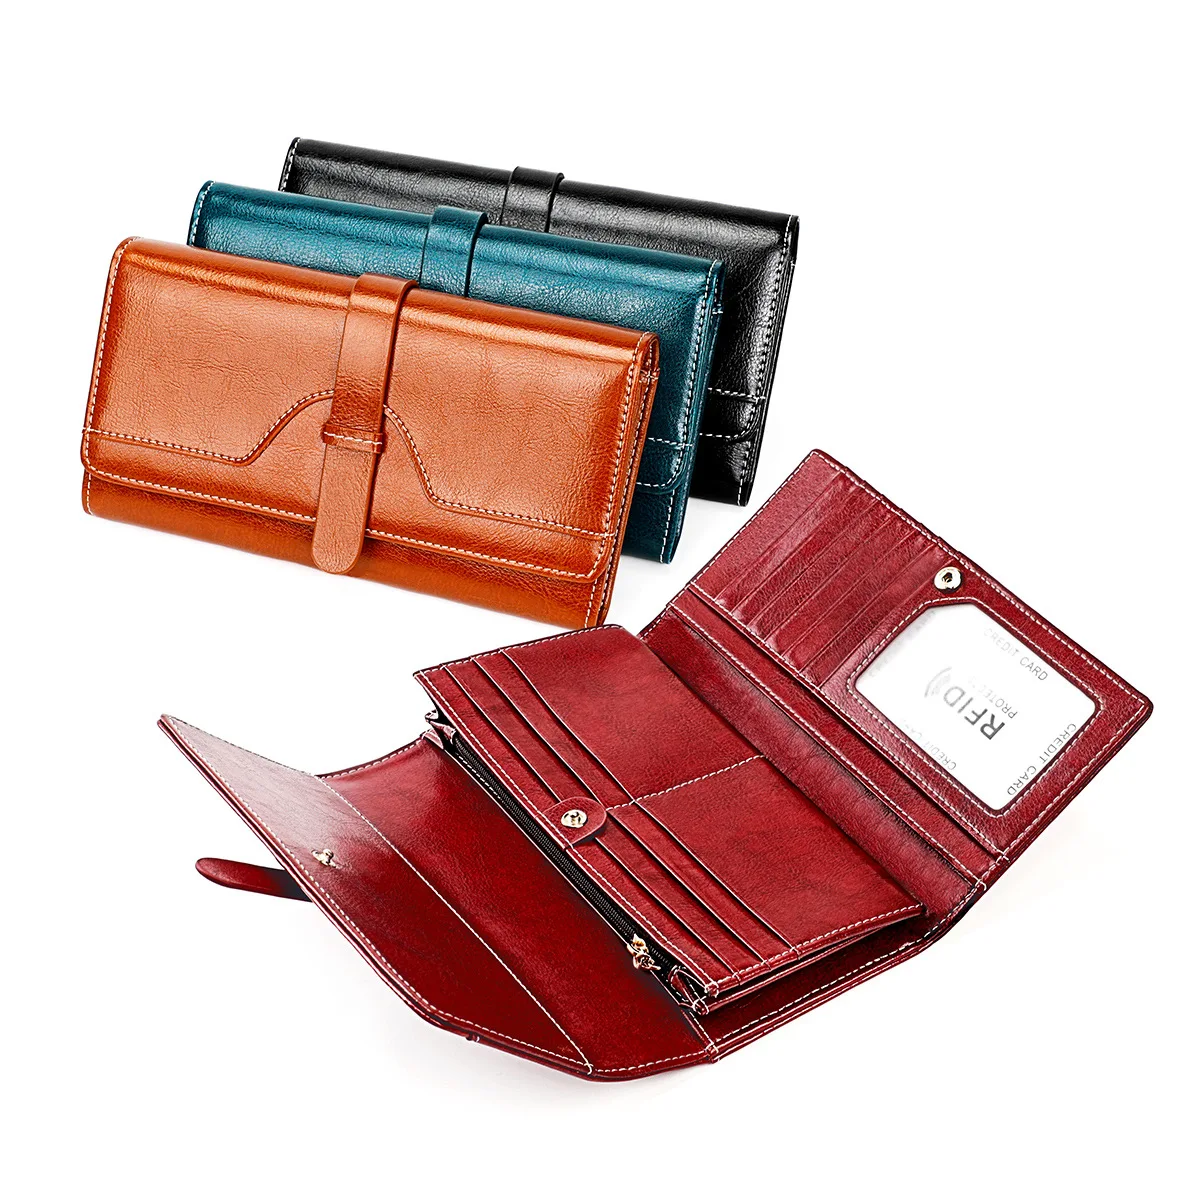 High Quality Leather Women Wallet Brand Long Purse Large Capacity Wallets RFID Blocking Female Card Holders Clutch Phone Bag New